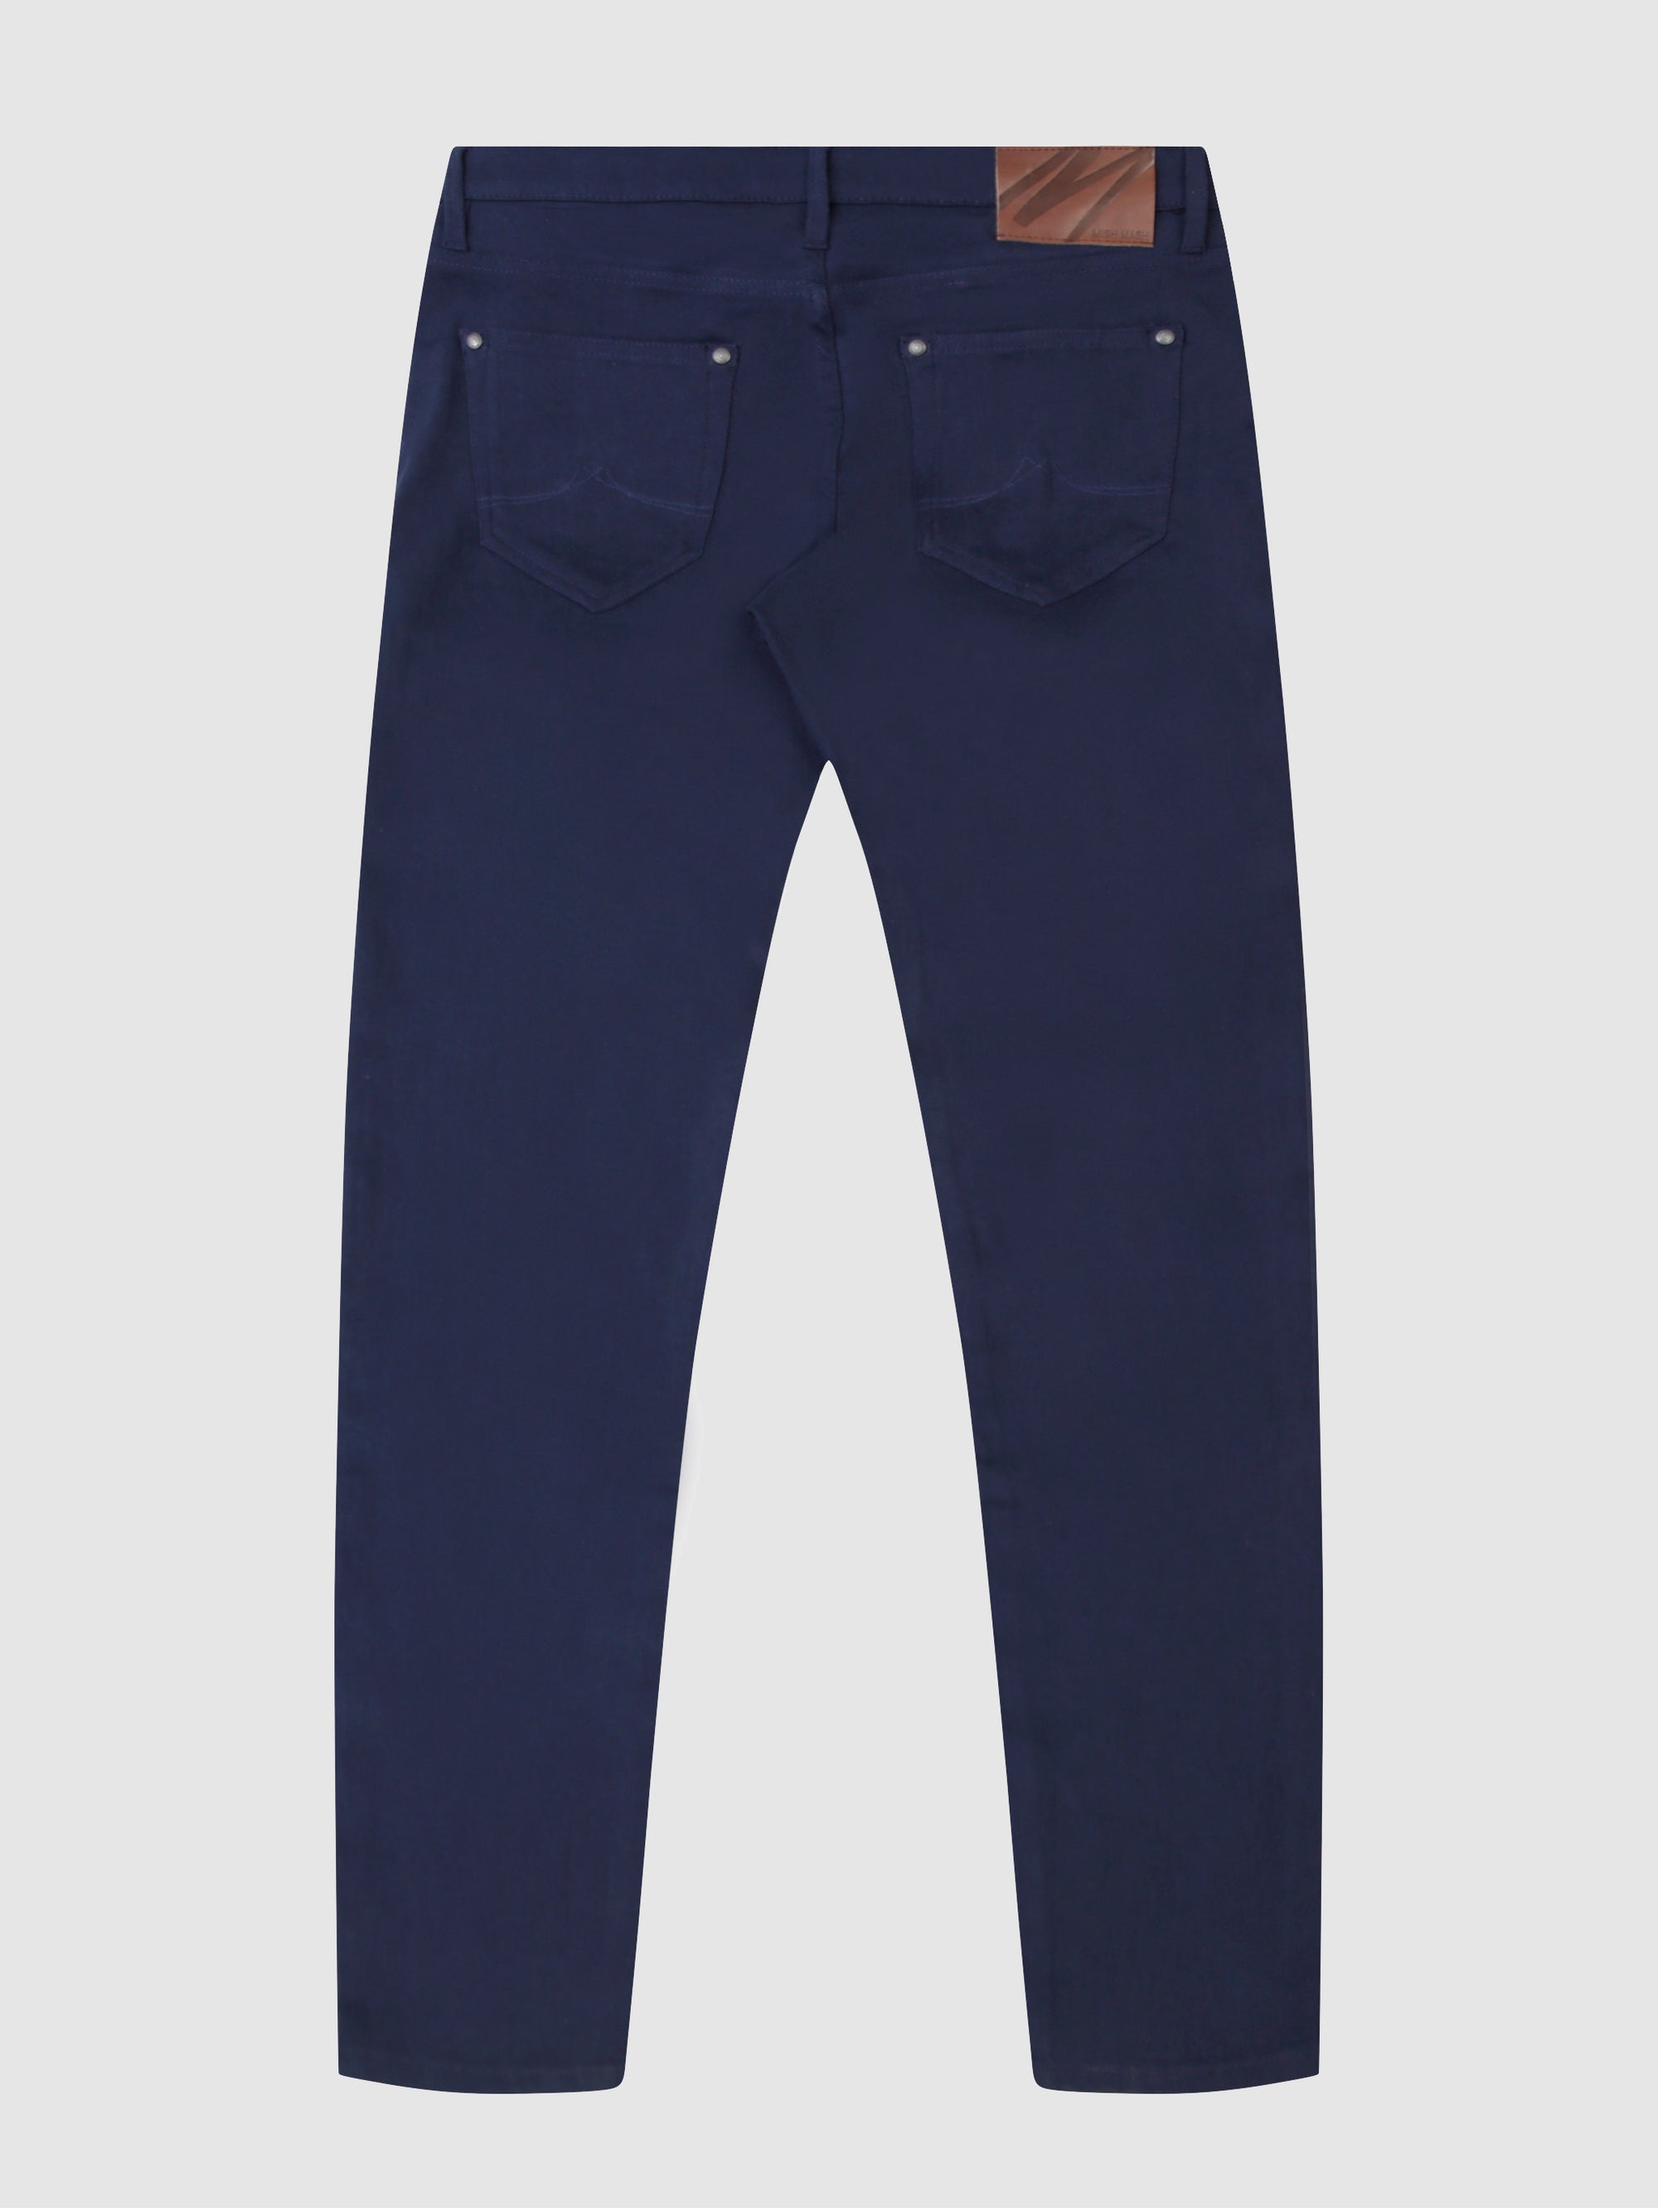 Tapered Fit Abyss Navy Jean